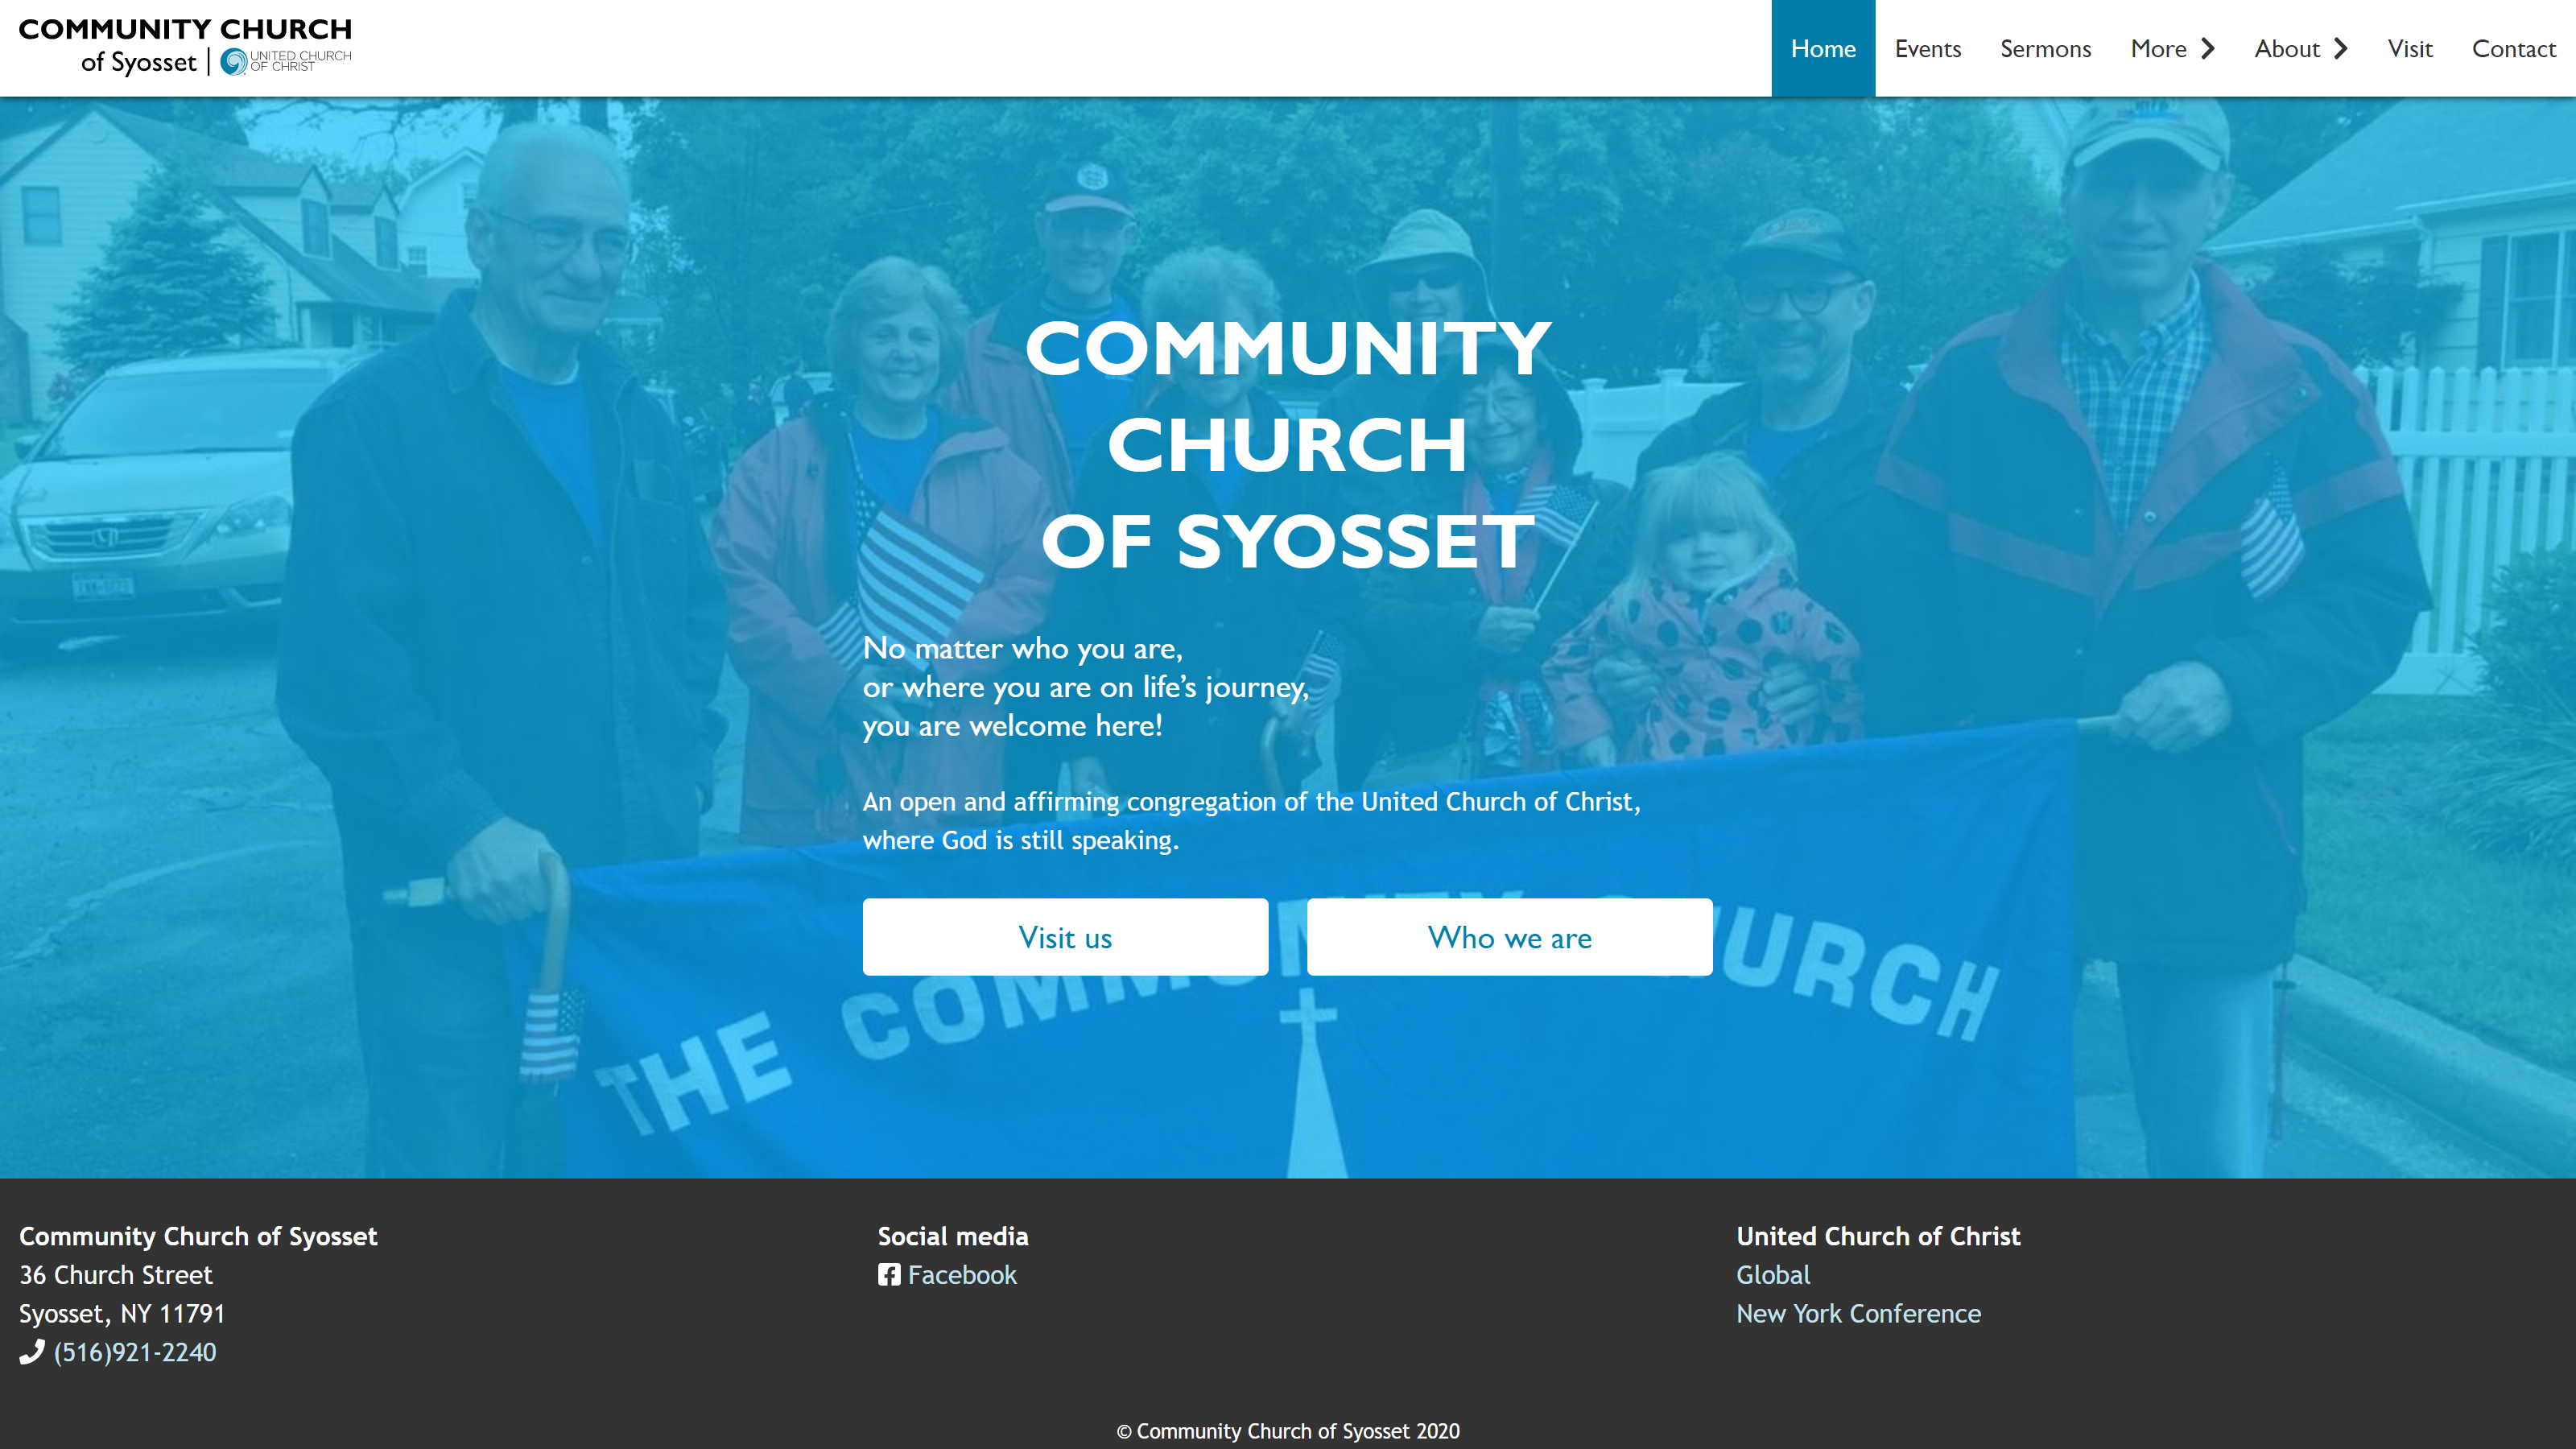 The homepage of uccsyosset.org, featuring an image of members of the church carrying a parade banner.